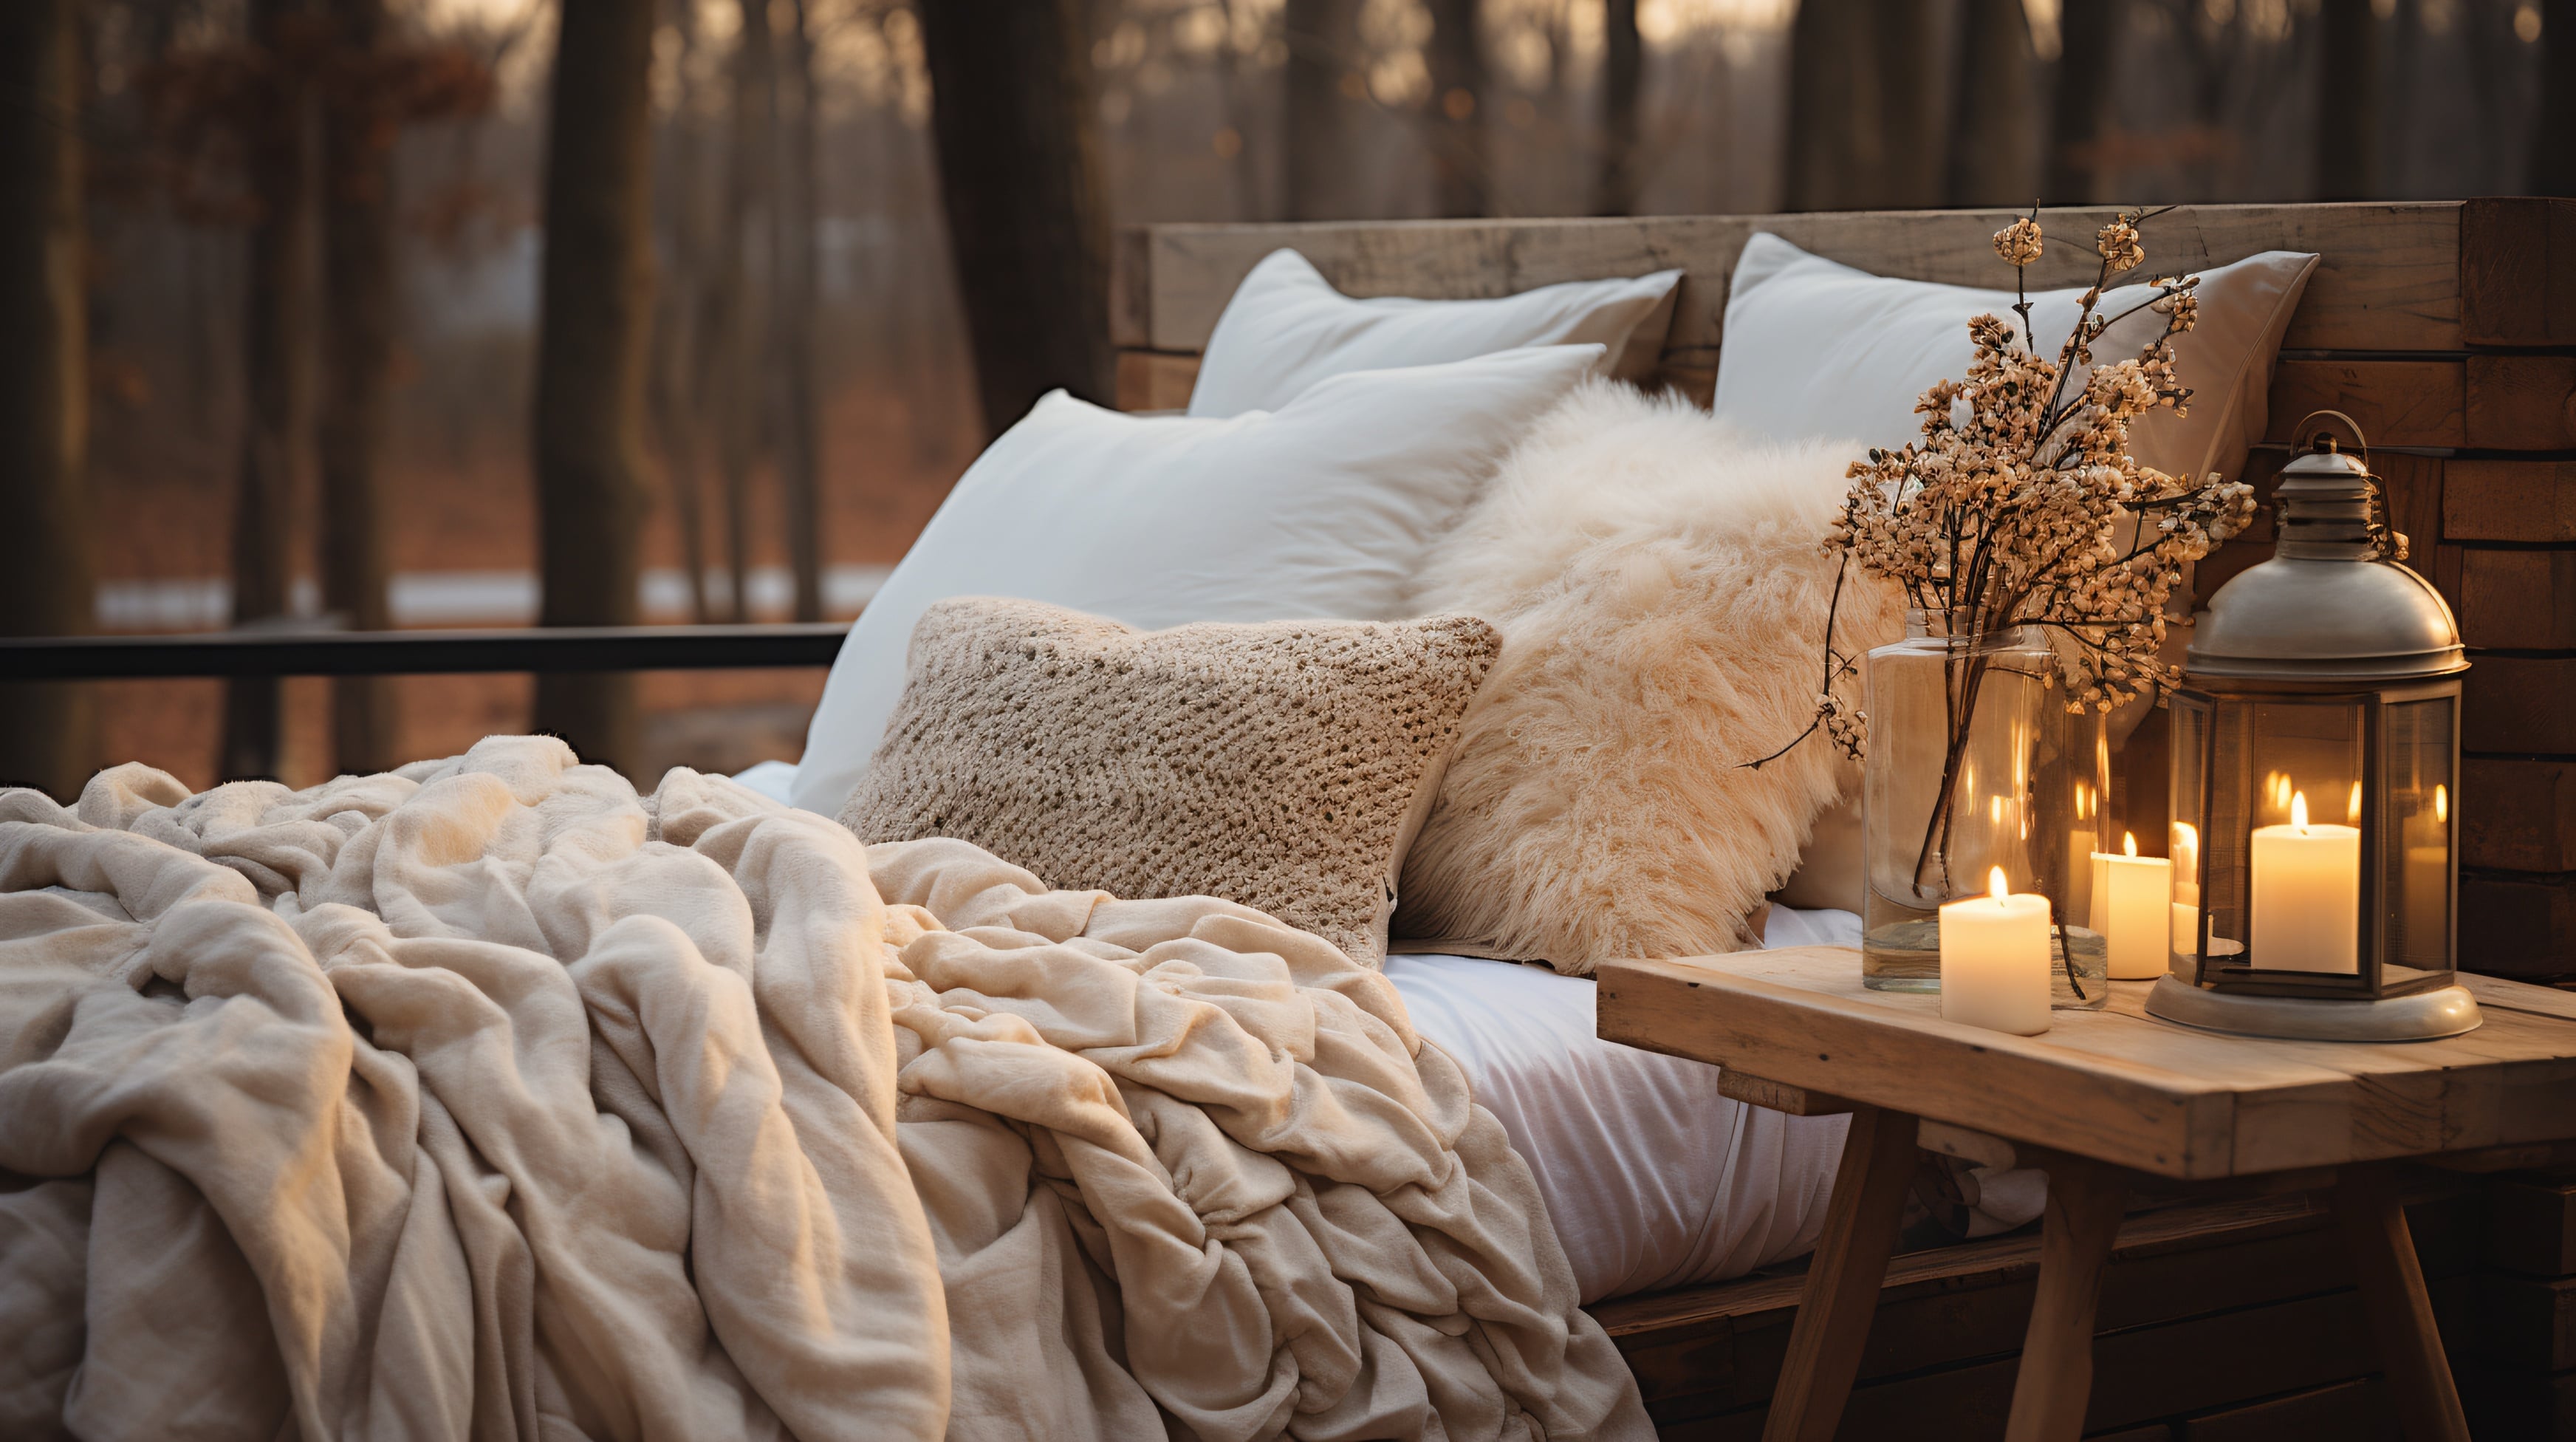 A bed outdoors in the woods surrounded by trees. Candles lie on bedside tables constructed from natural wood and the bed is filled with tactile bedding and cushions to promote the concept of sleep wellness.